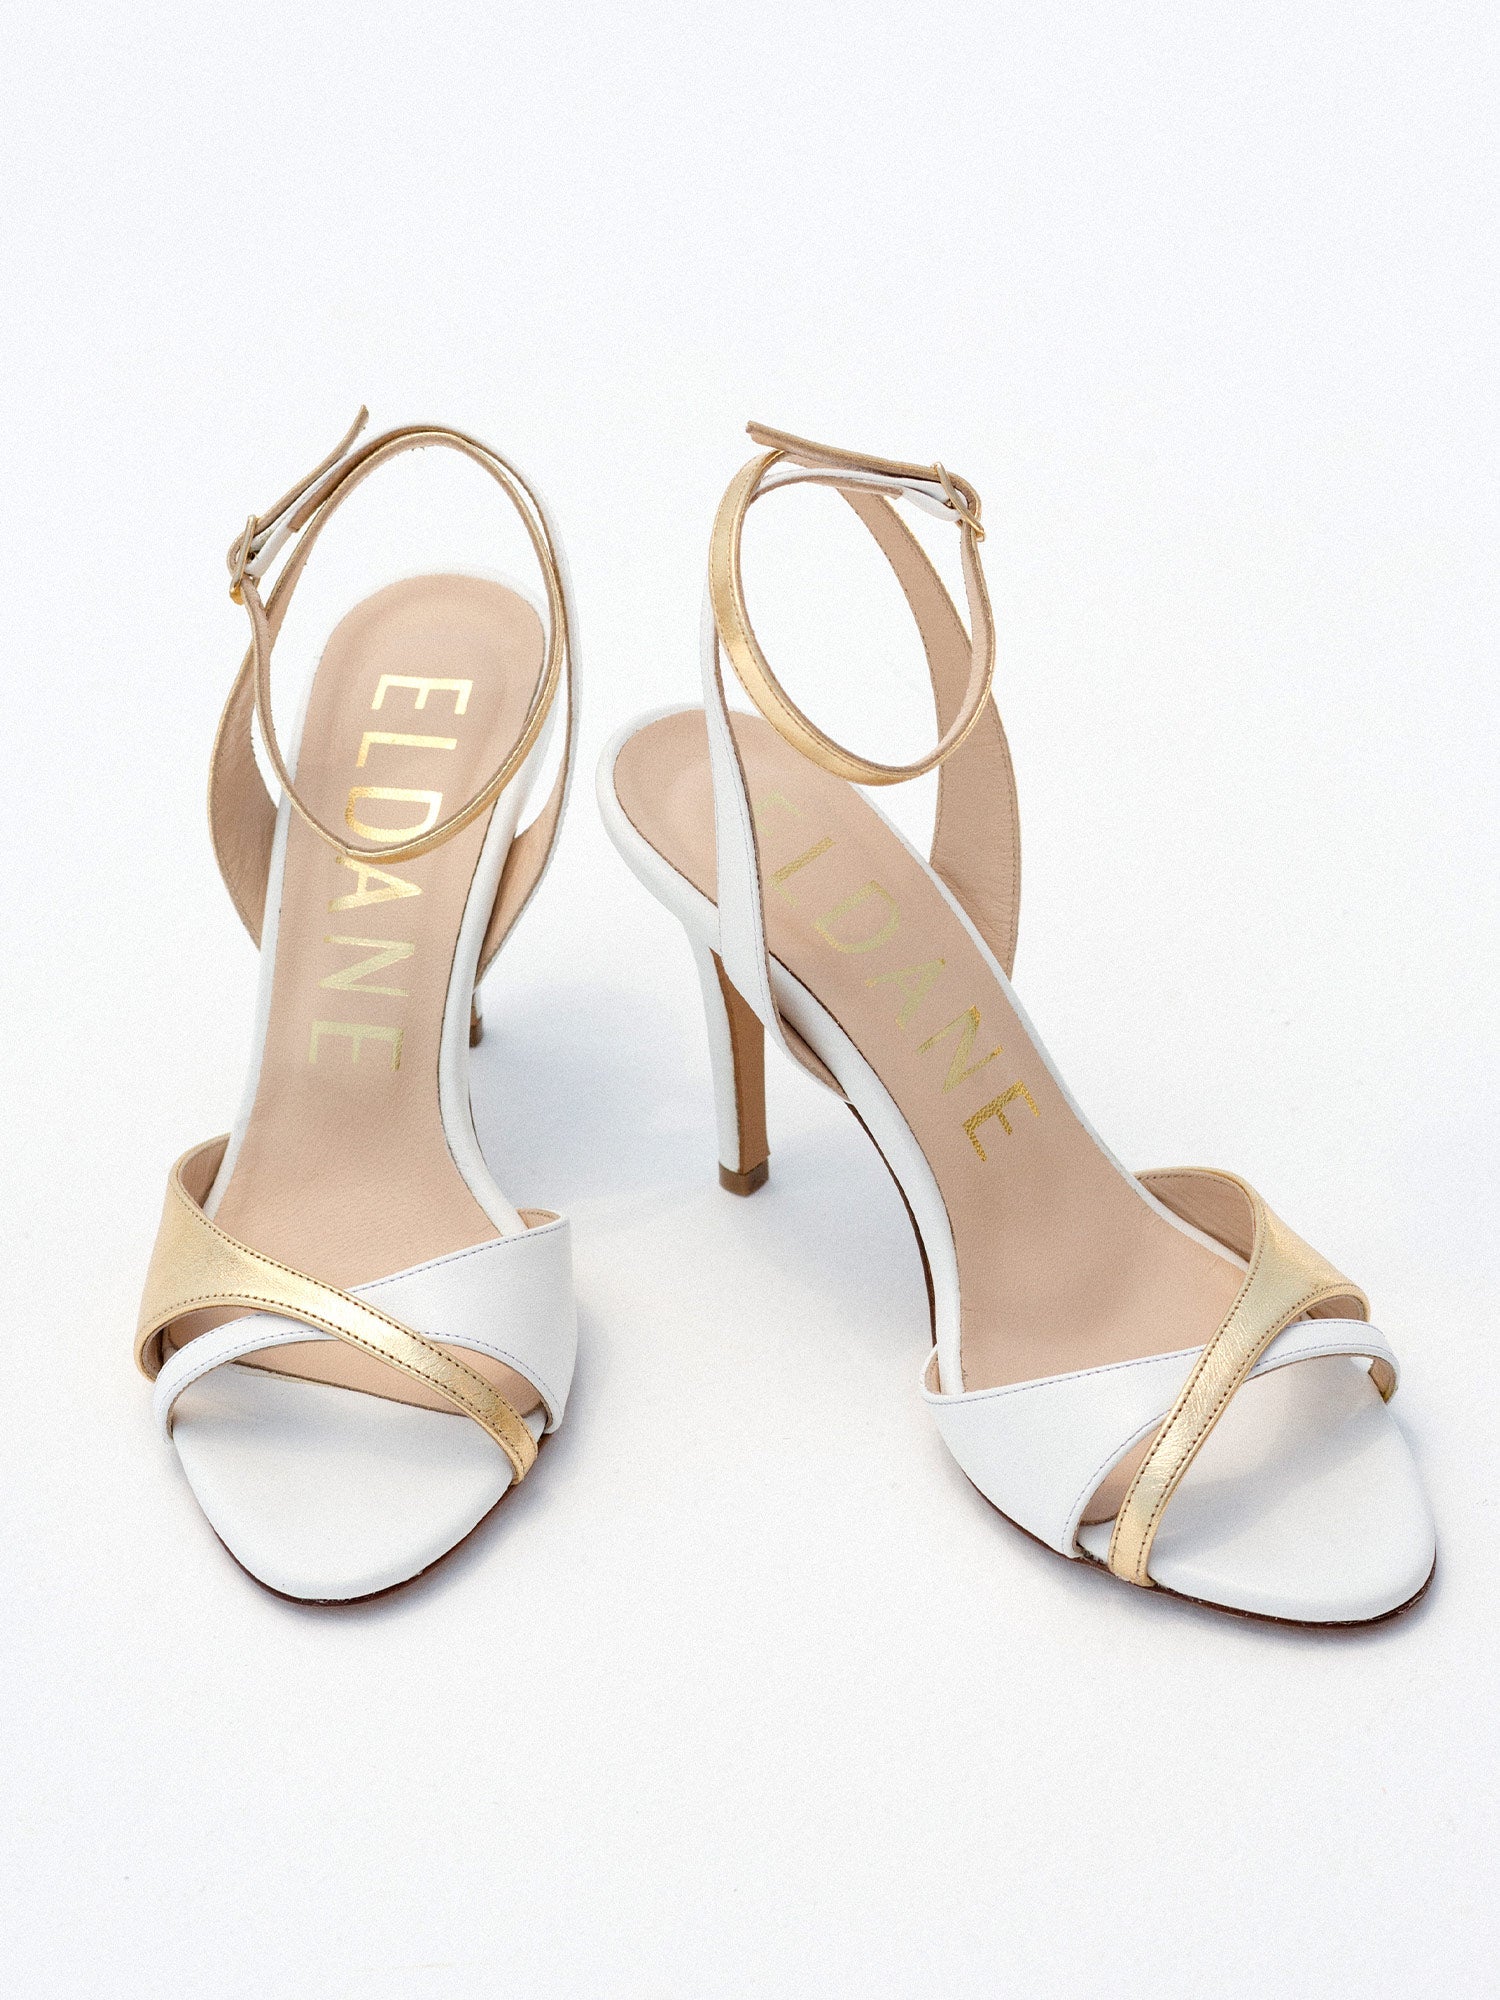 Heeled leather sandals in white and gold